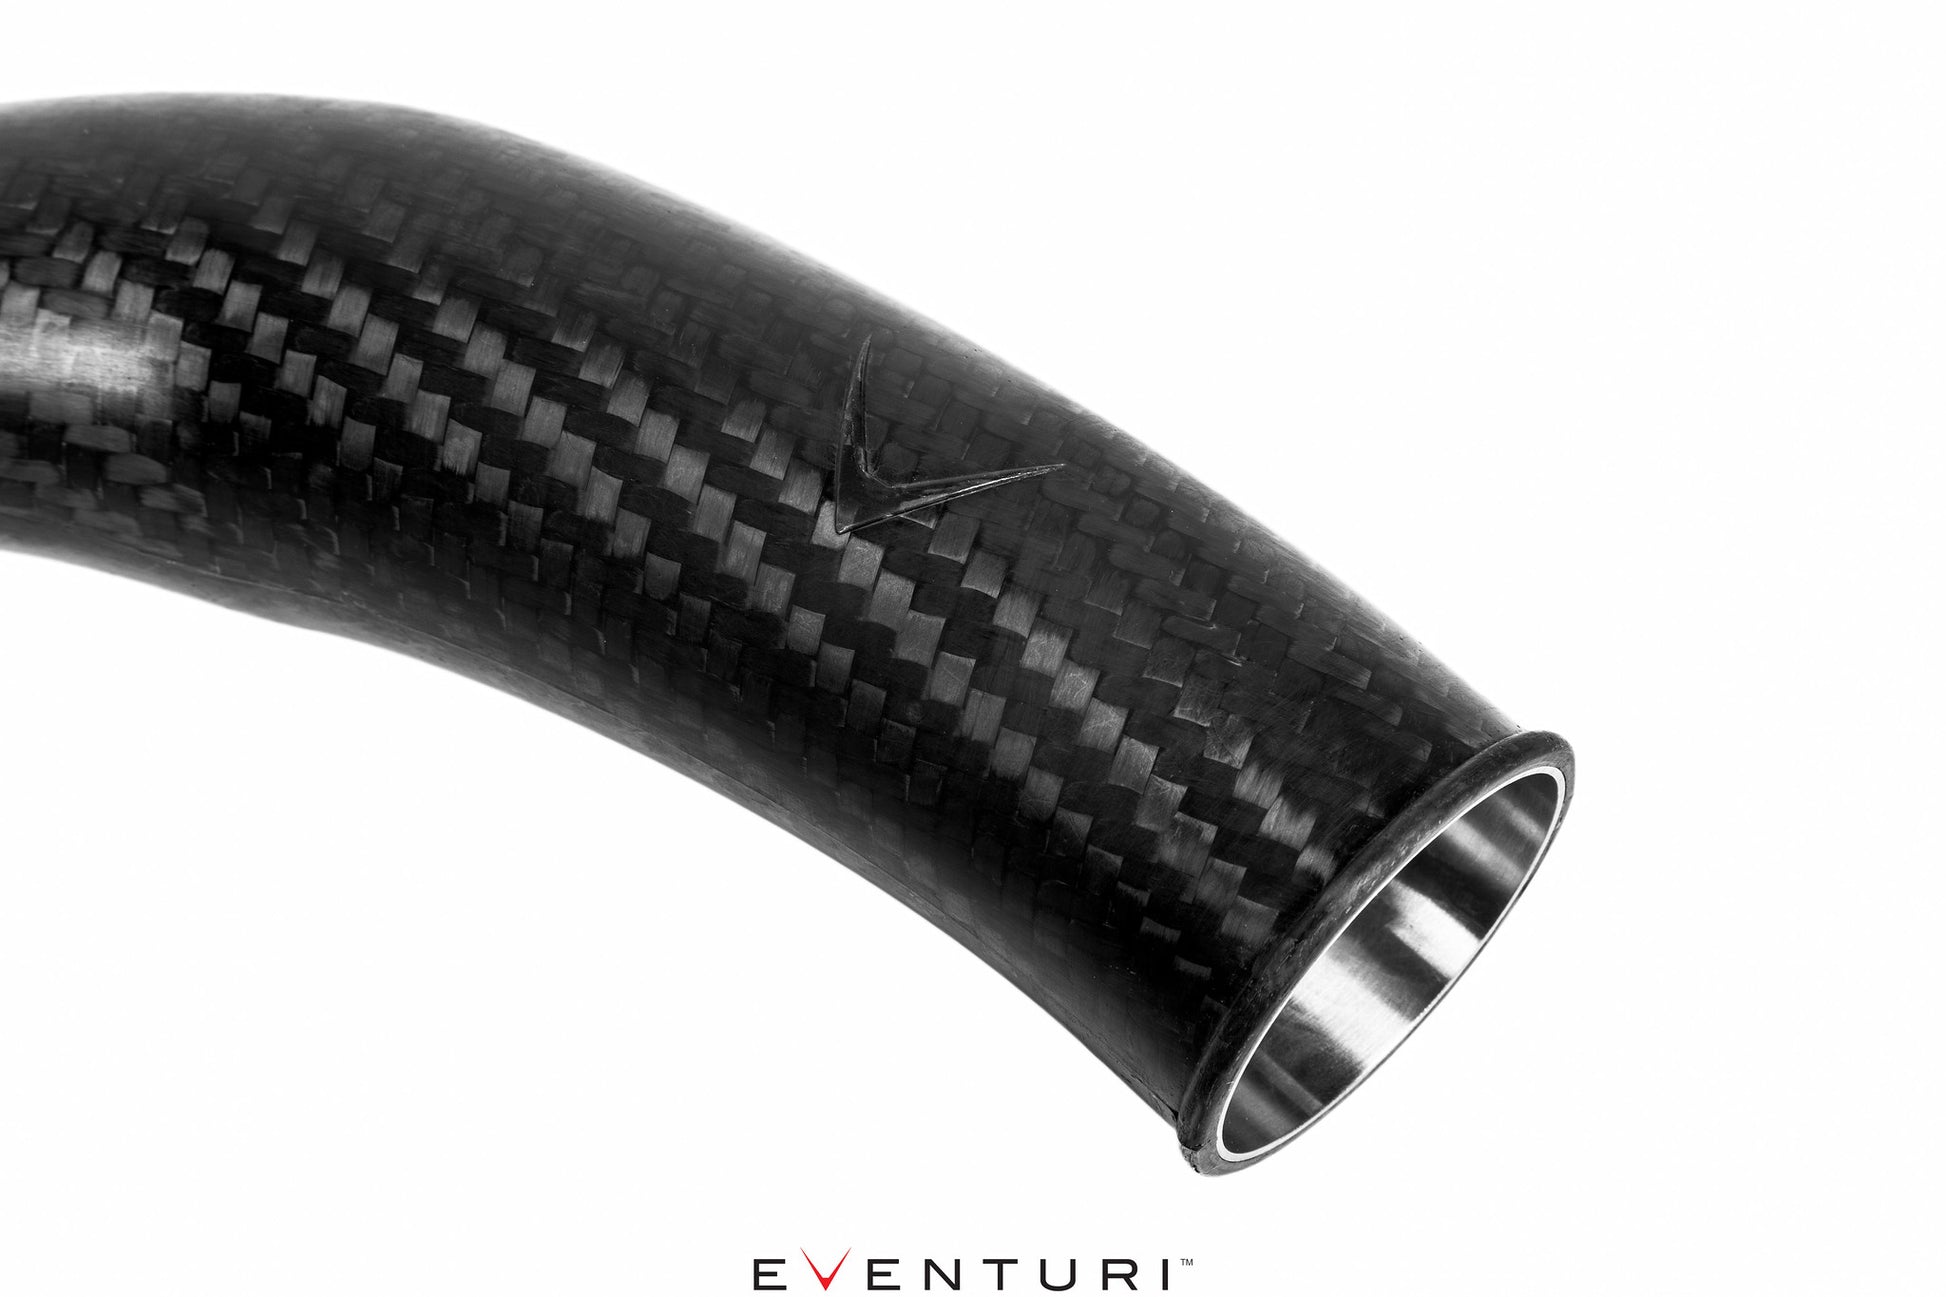 Eventuri BMW S55 F80 F82 F87 Carbon Chargepipes (M2 Competition, M3 & M4) - ML Performance UK